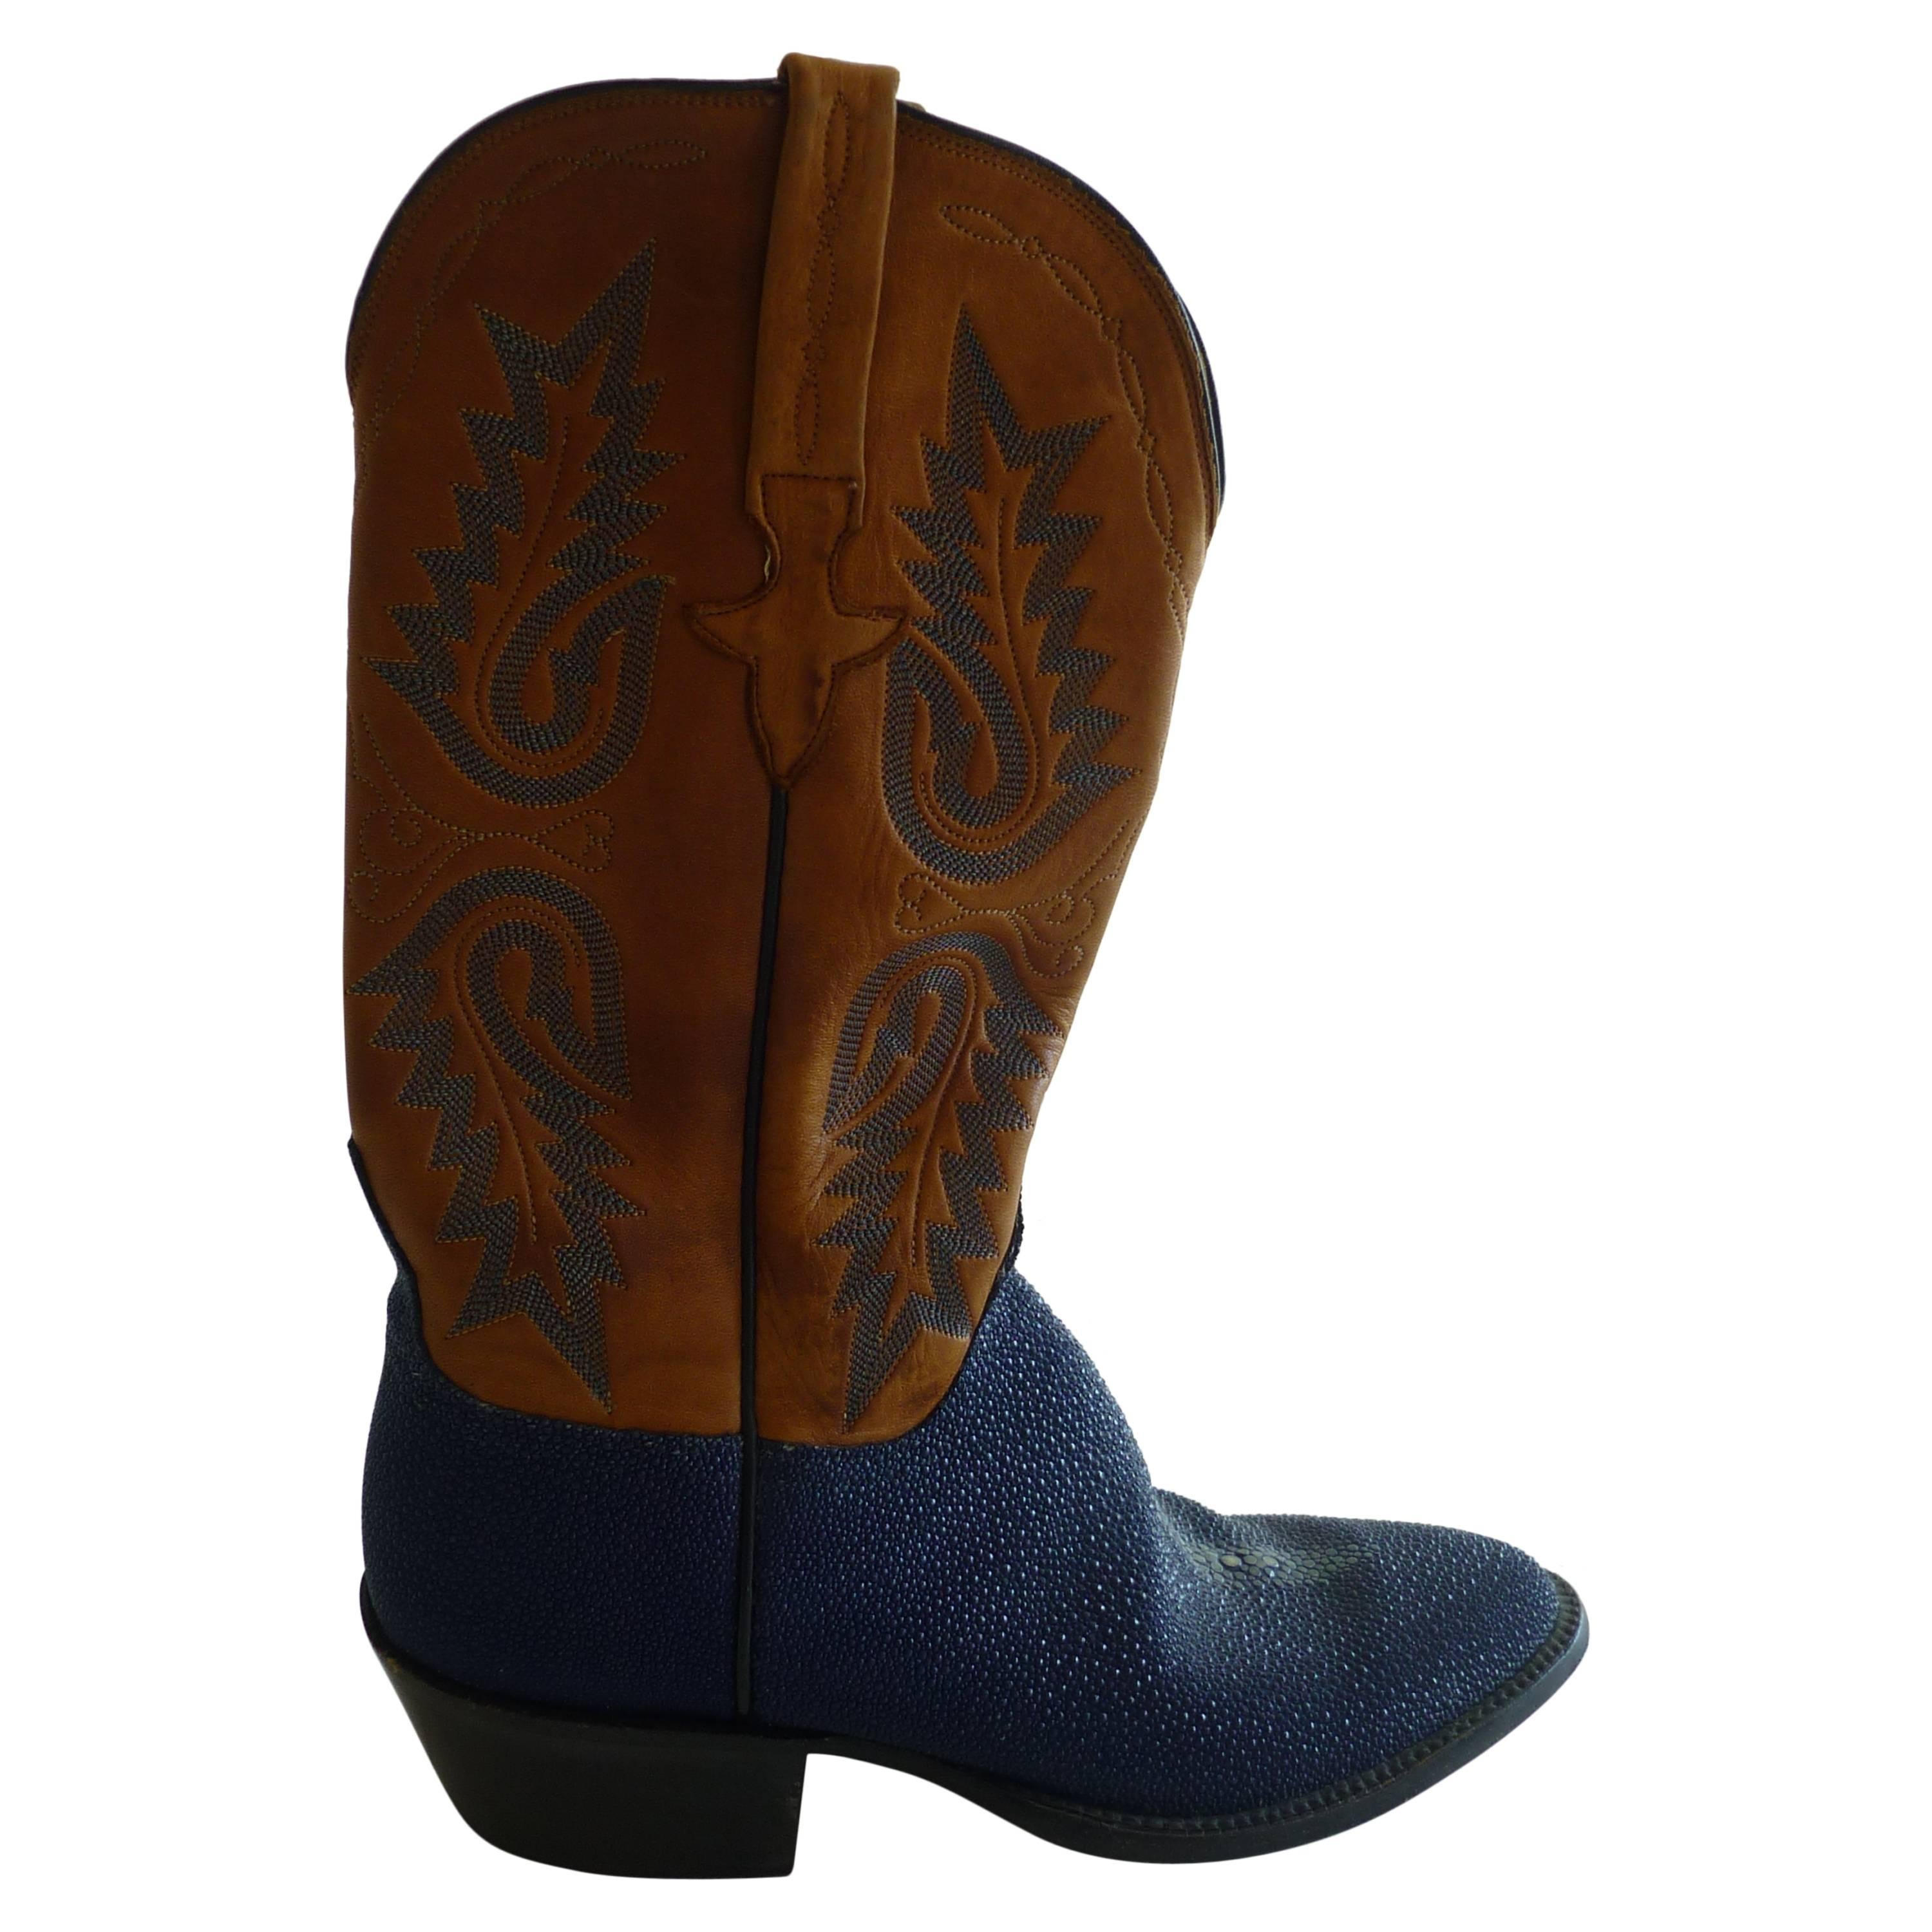 Lucchese Stingray and Tooled Leather Hand Made Cowboy Boots (8B)